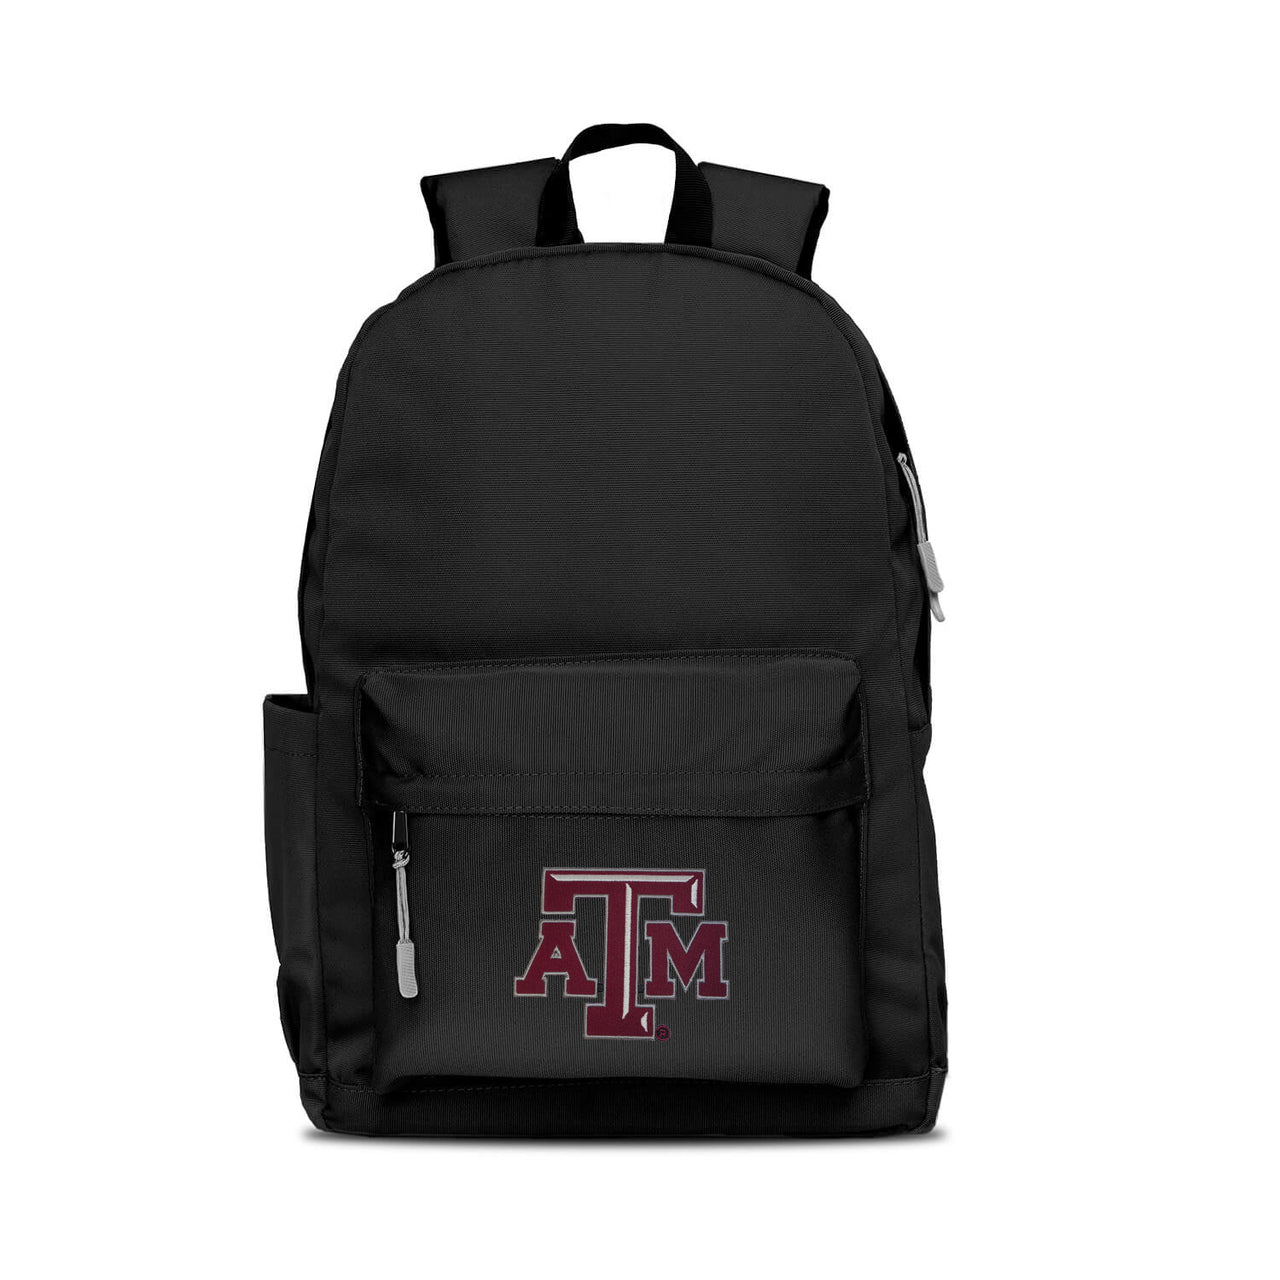 Texas A&M Aggies Campus Laptop Backpack- Black